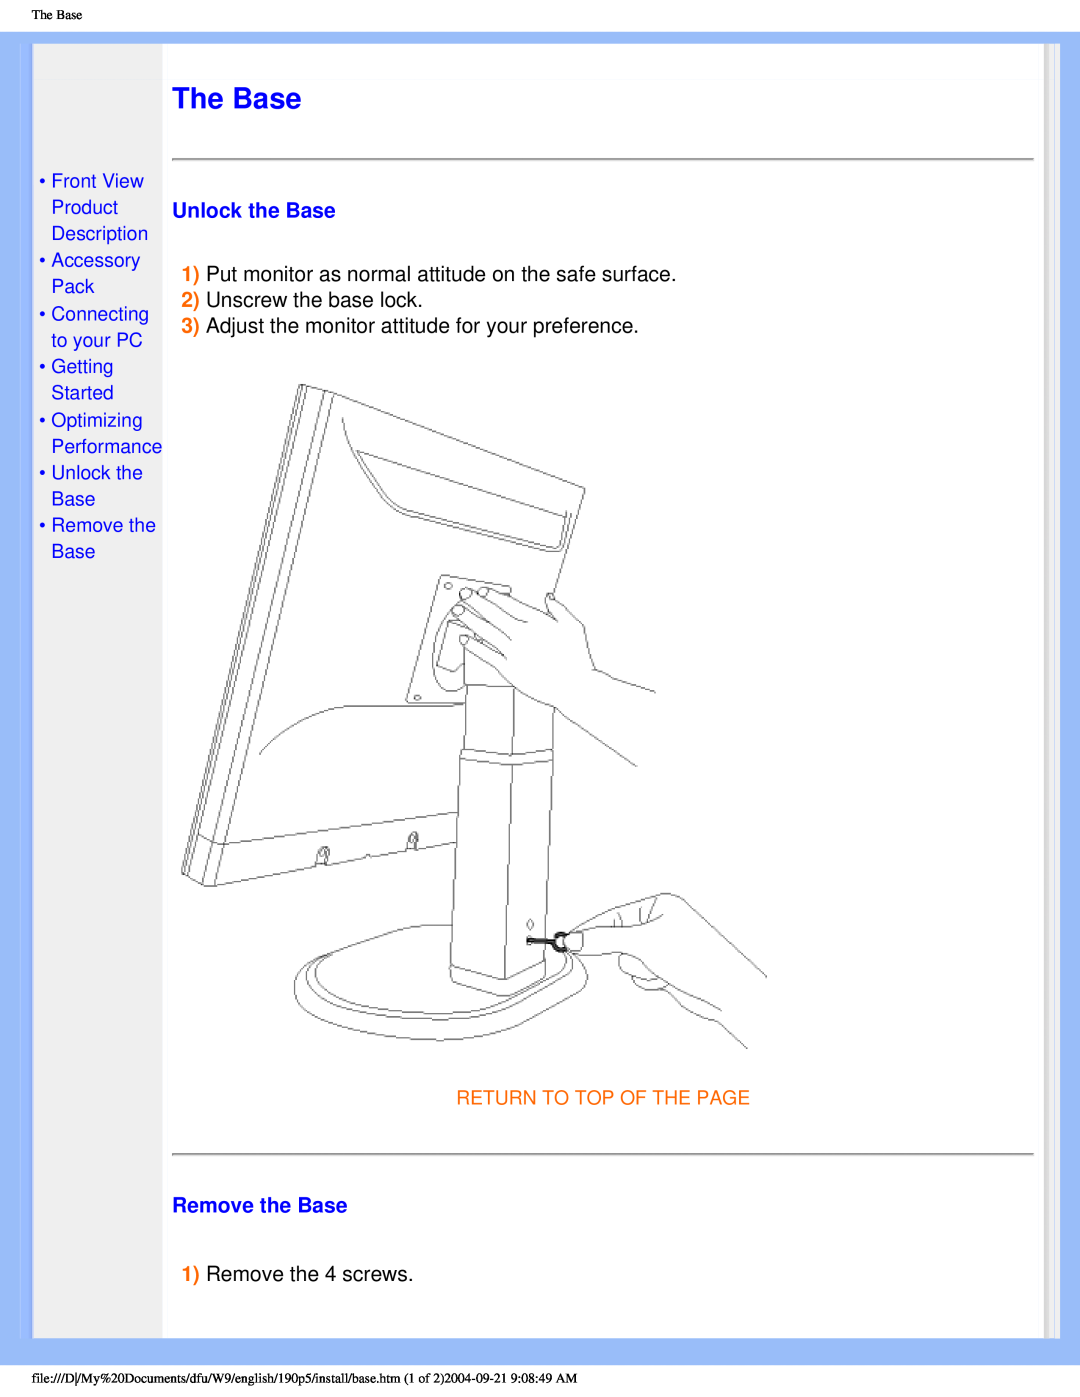 Philips 190PS user manual The Base, Getting Started, Unlock the Base Remove the Base, Return To Top Of The Page 